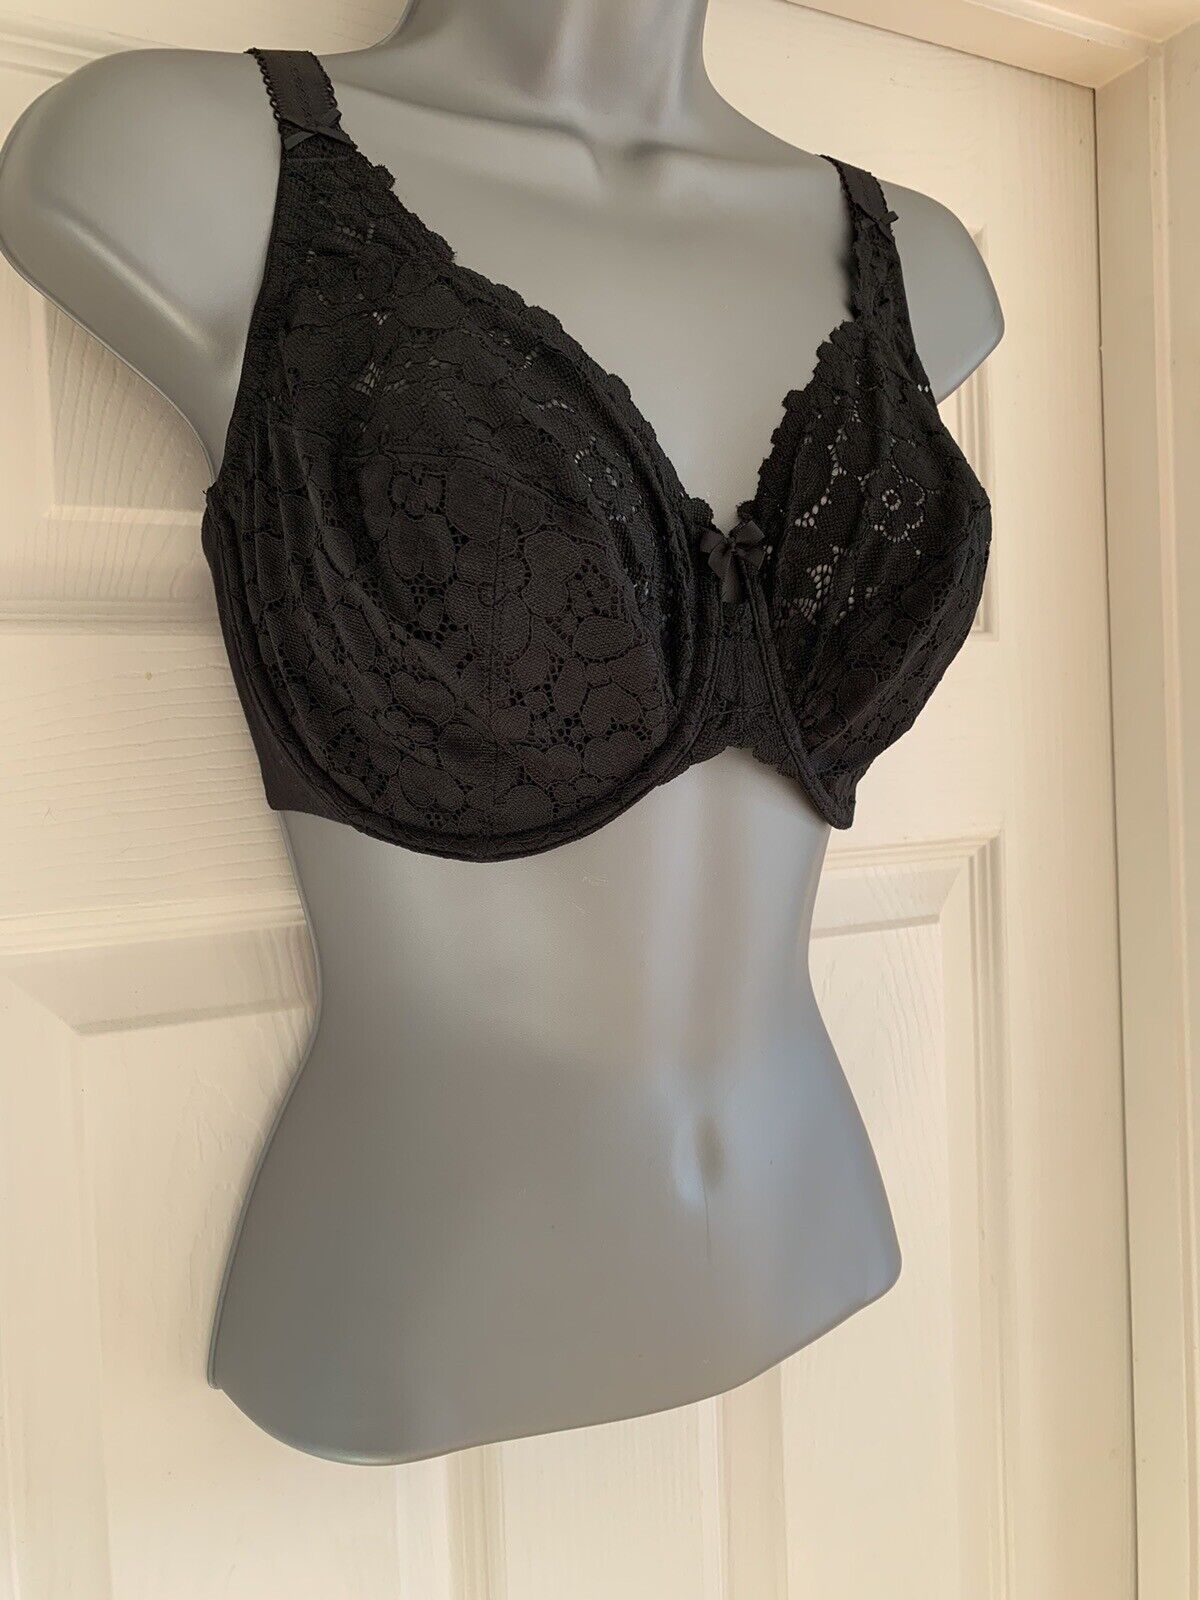 EX M*S Black Cool Comfort Non-Padded Full Cup Bra in Sizes 34F or 36E